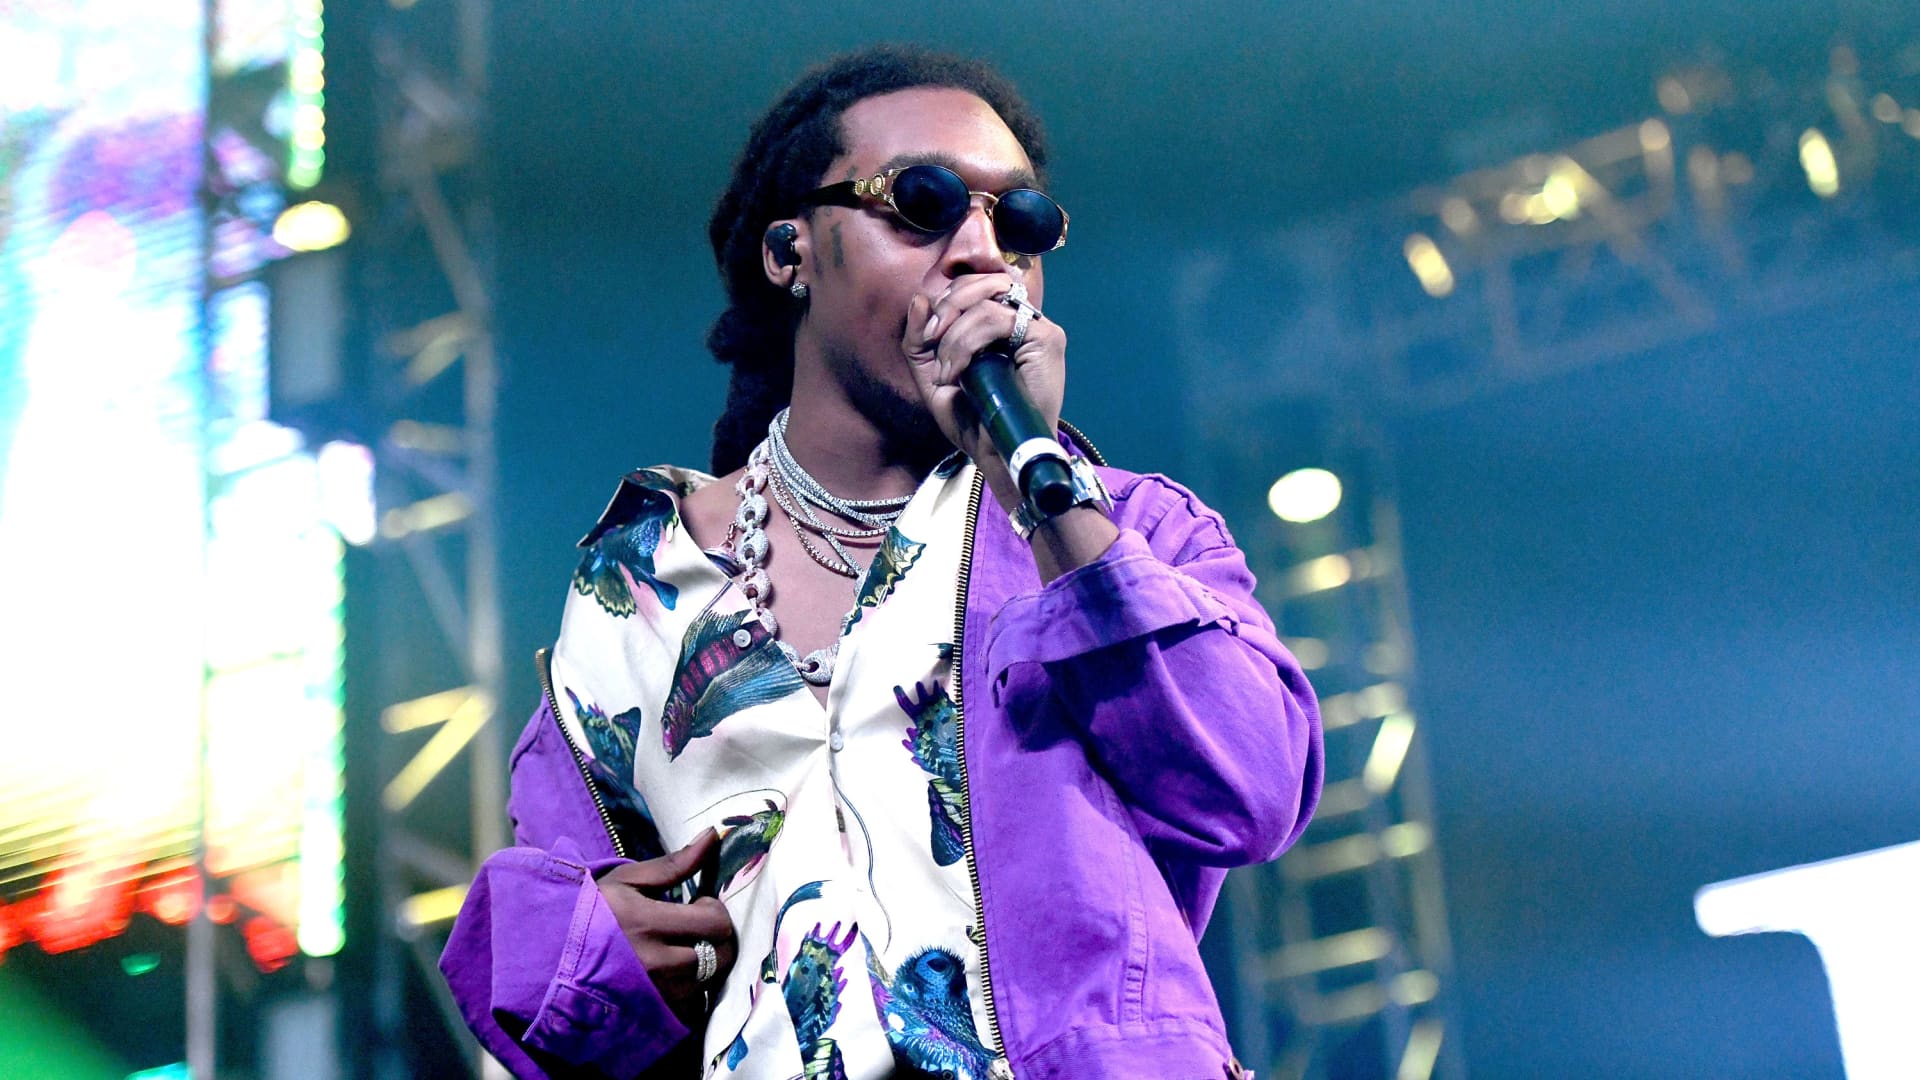 Migos rapper Takeoff killed in Houston taking pictures, aged 28